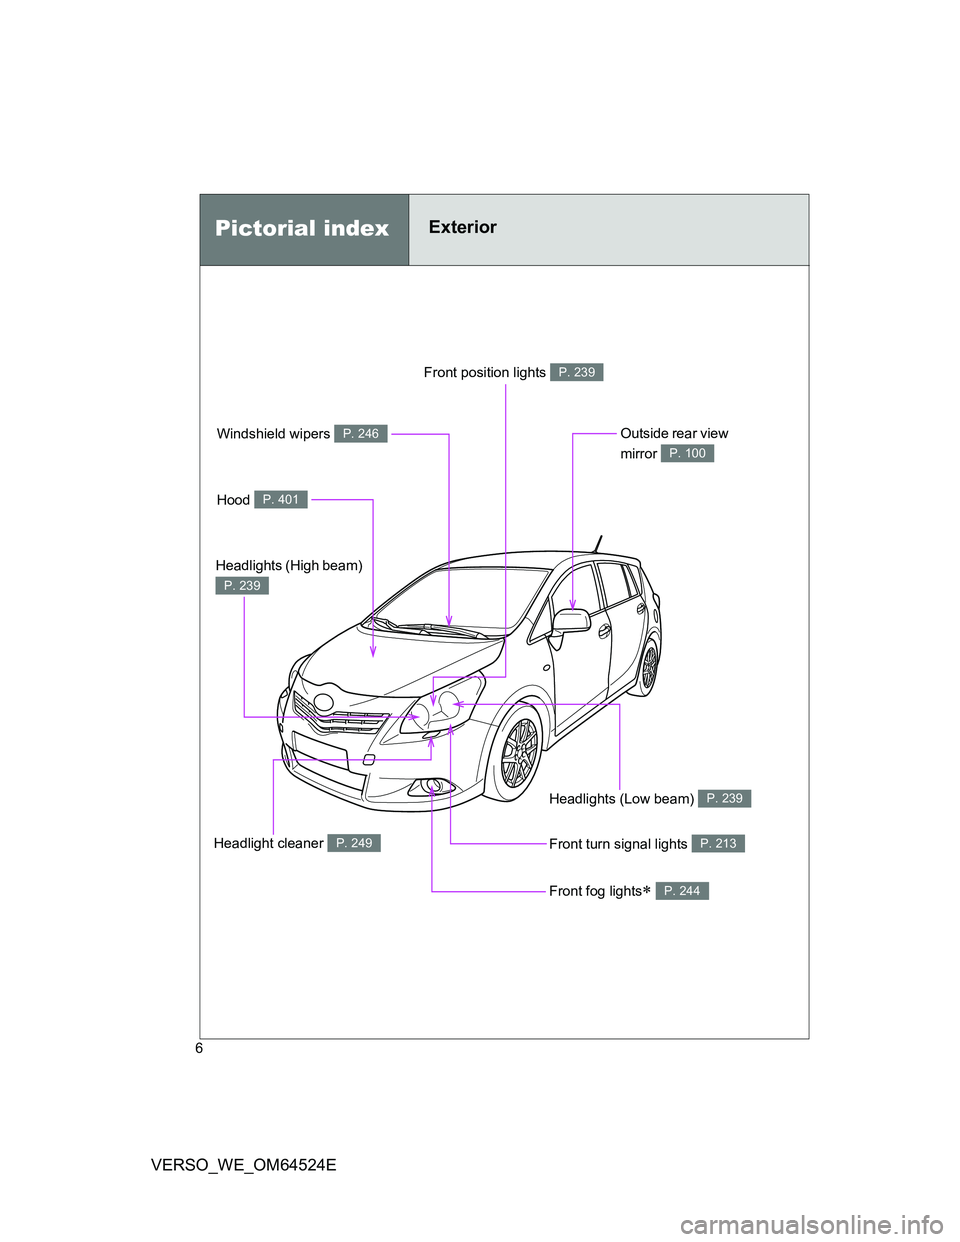 TOYOTA VERSO 2012  Owners Manual 6
VERSO_WE_OM64524E
Headlights (Low beam) P. 239
Pictorial indexExterior
Front fog lights P. 244
Front turn signal lights P. 213
Hood P. 401
Windshield wipers P. 246Outside rear view 
mirror 
P. 10